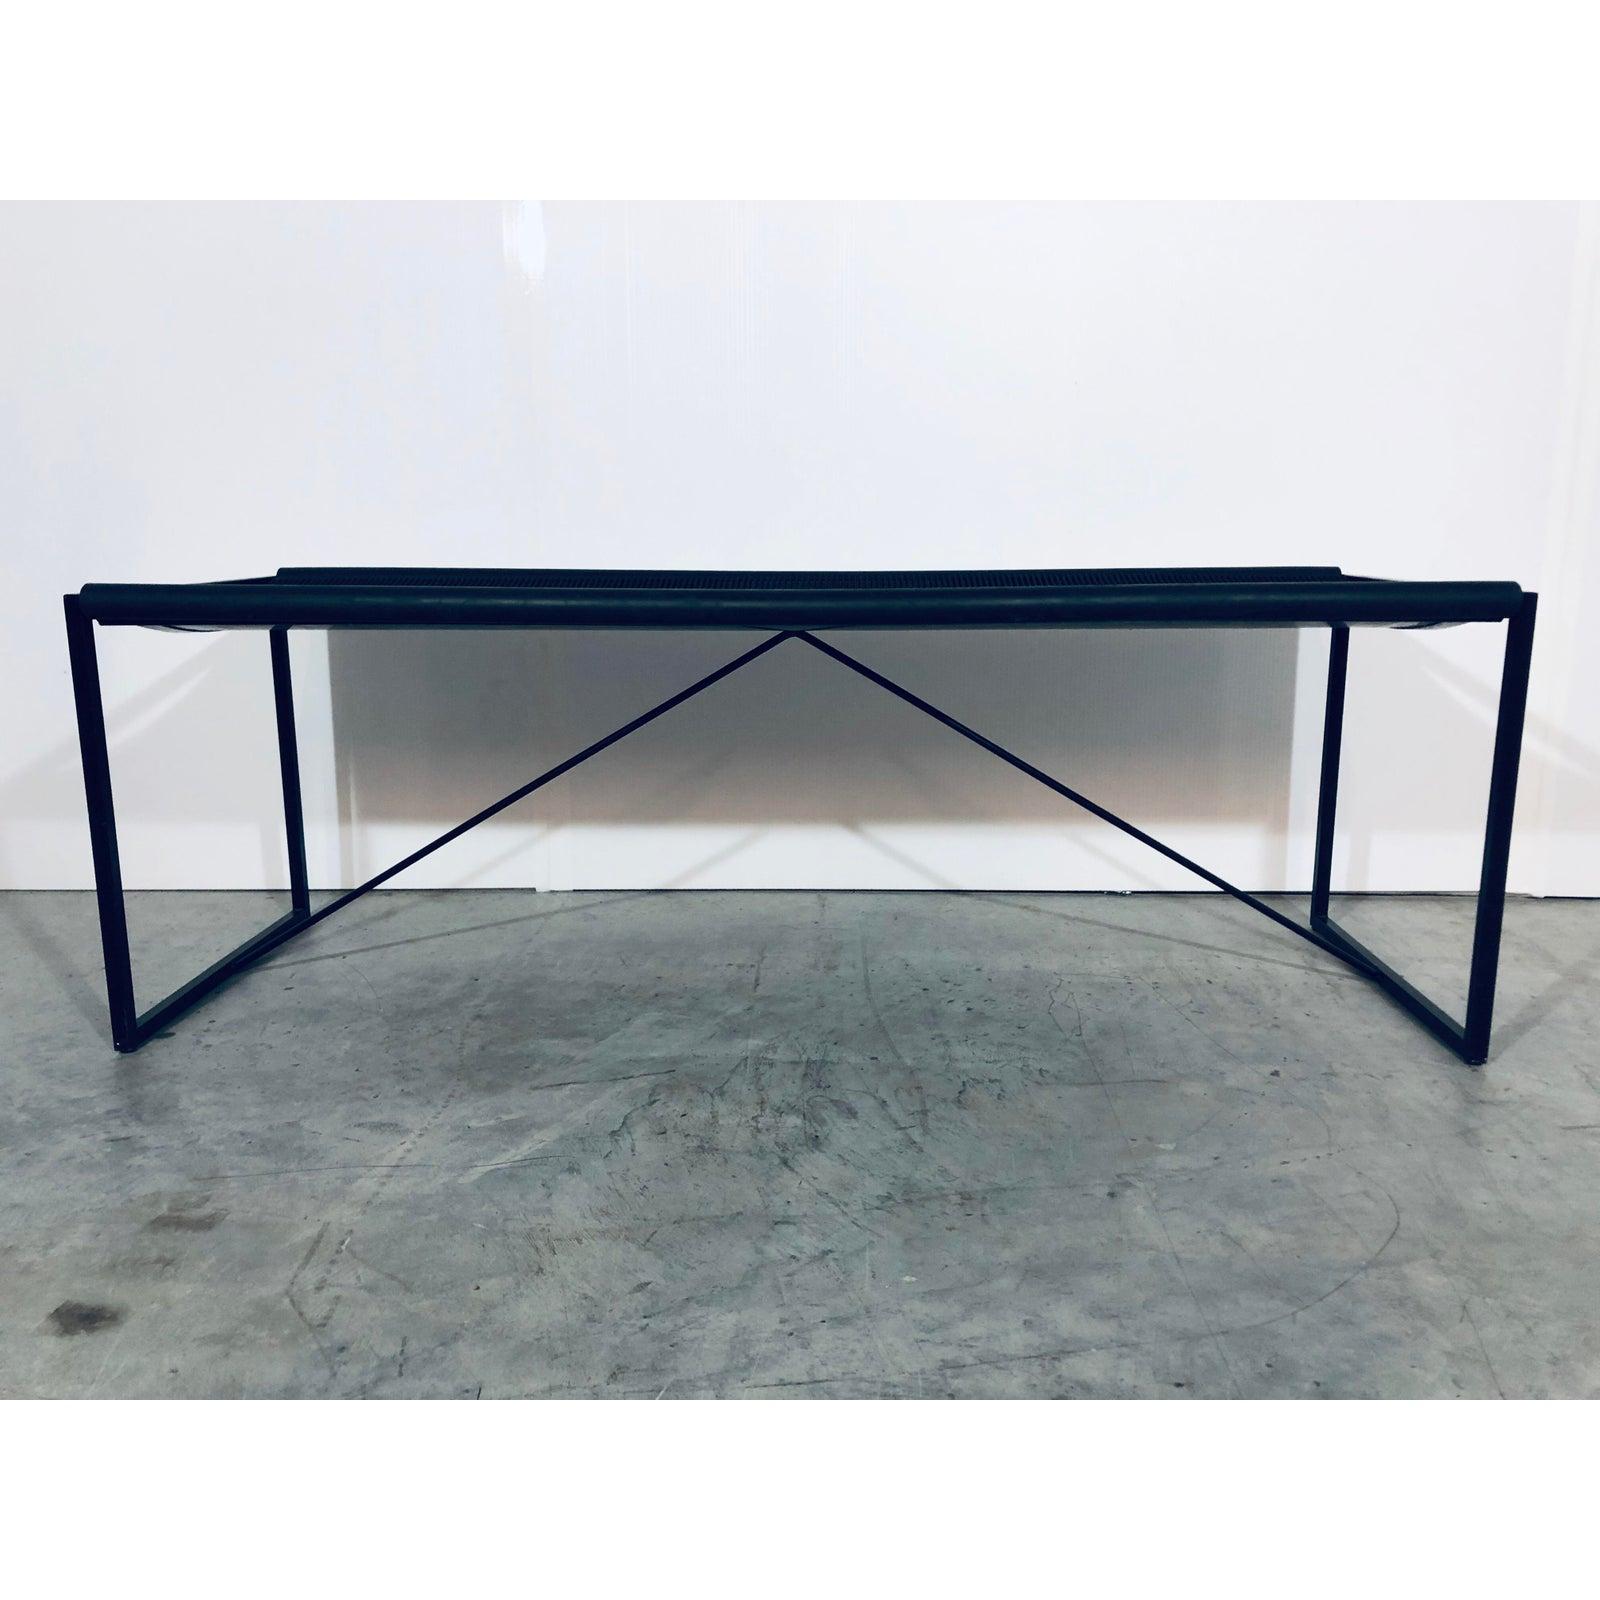 Post-Modern Maurizio Peregalli Modernist Bench for Zues, Italy, 1980s For Sale